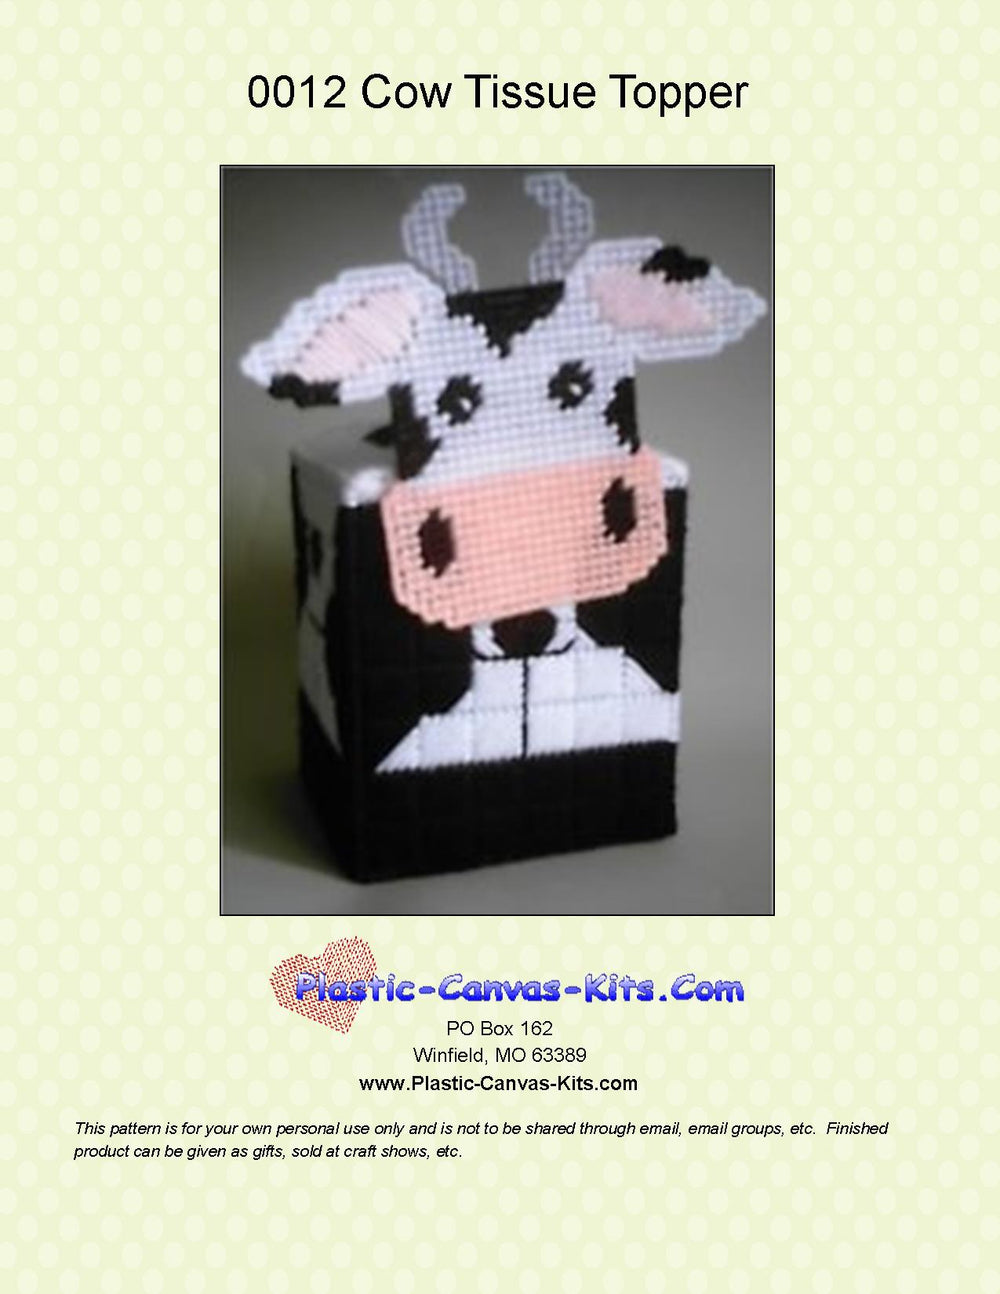 Cow Tissue Topper